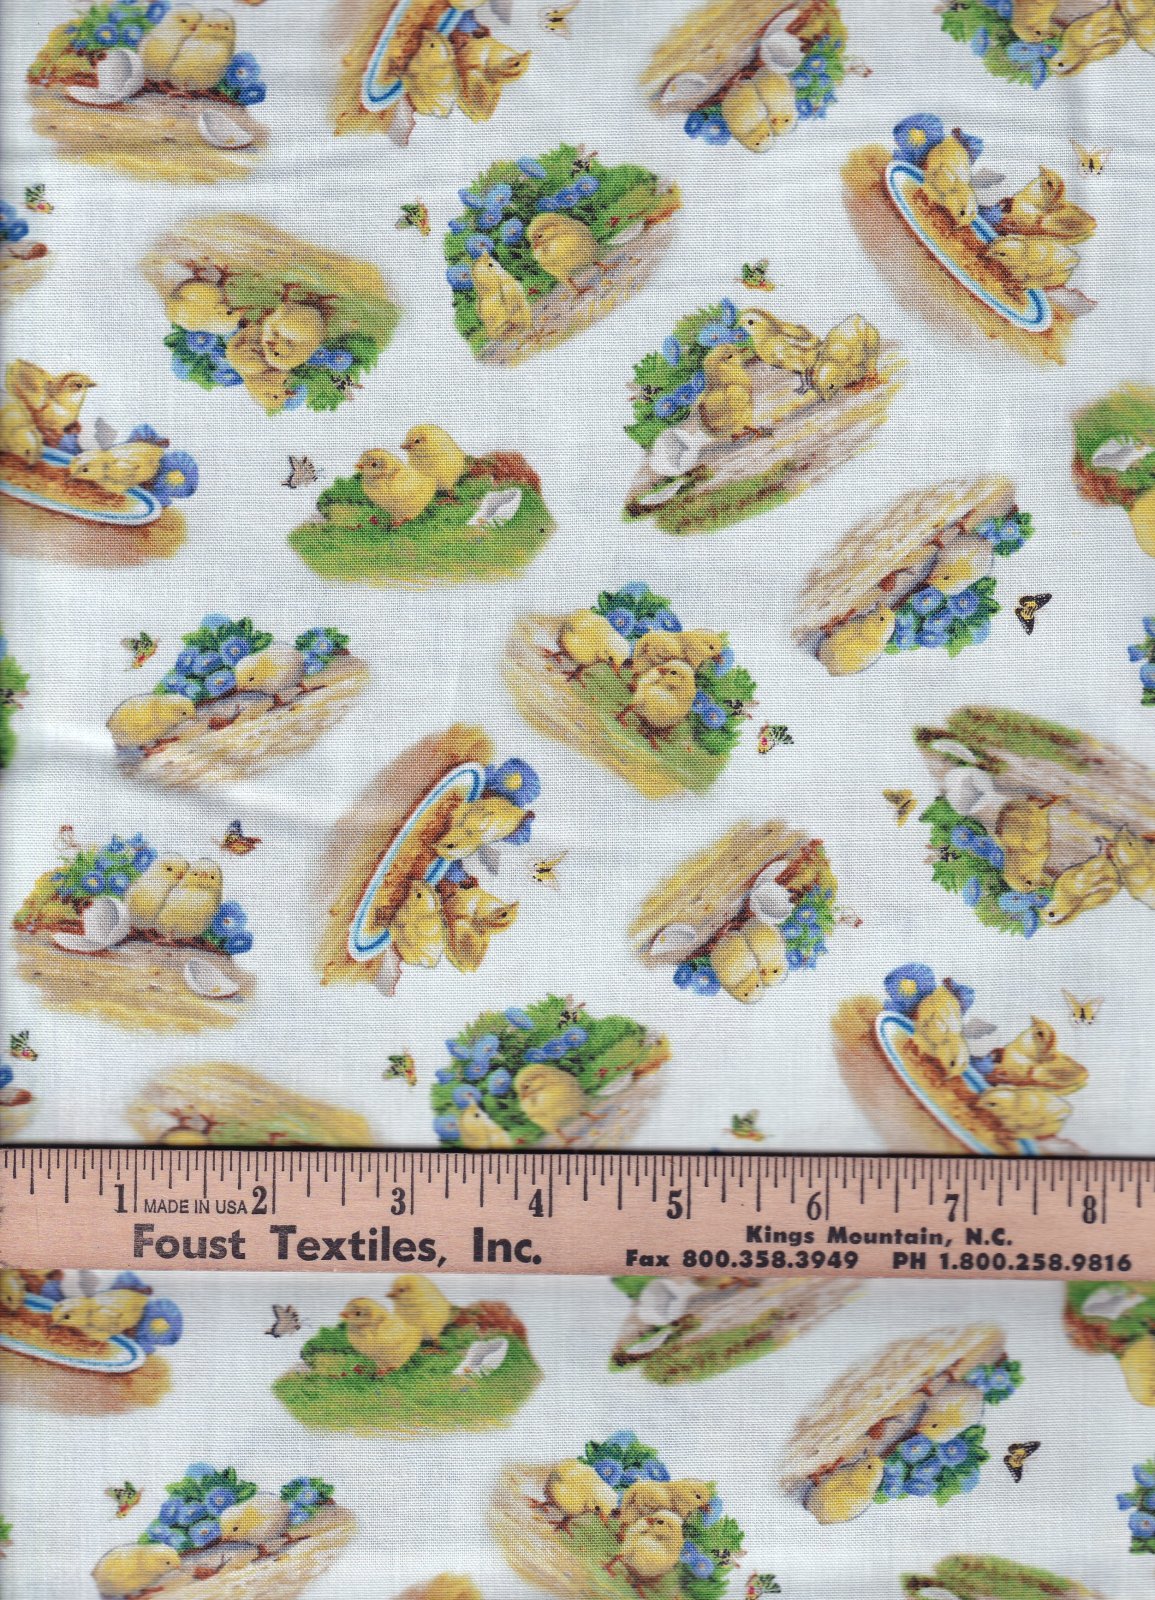 44 x 36 Adorable Baby Chicks on White 100% Cotton Fabric Easter